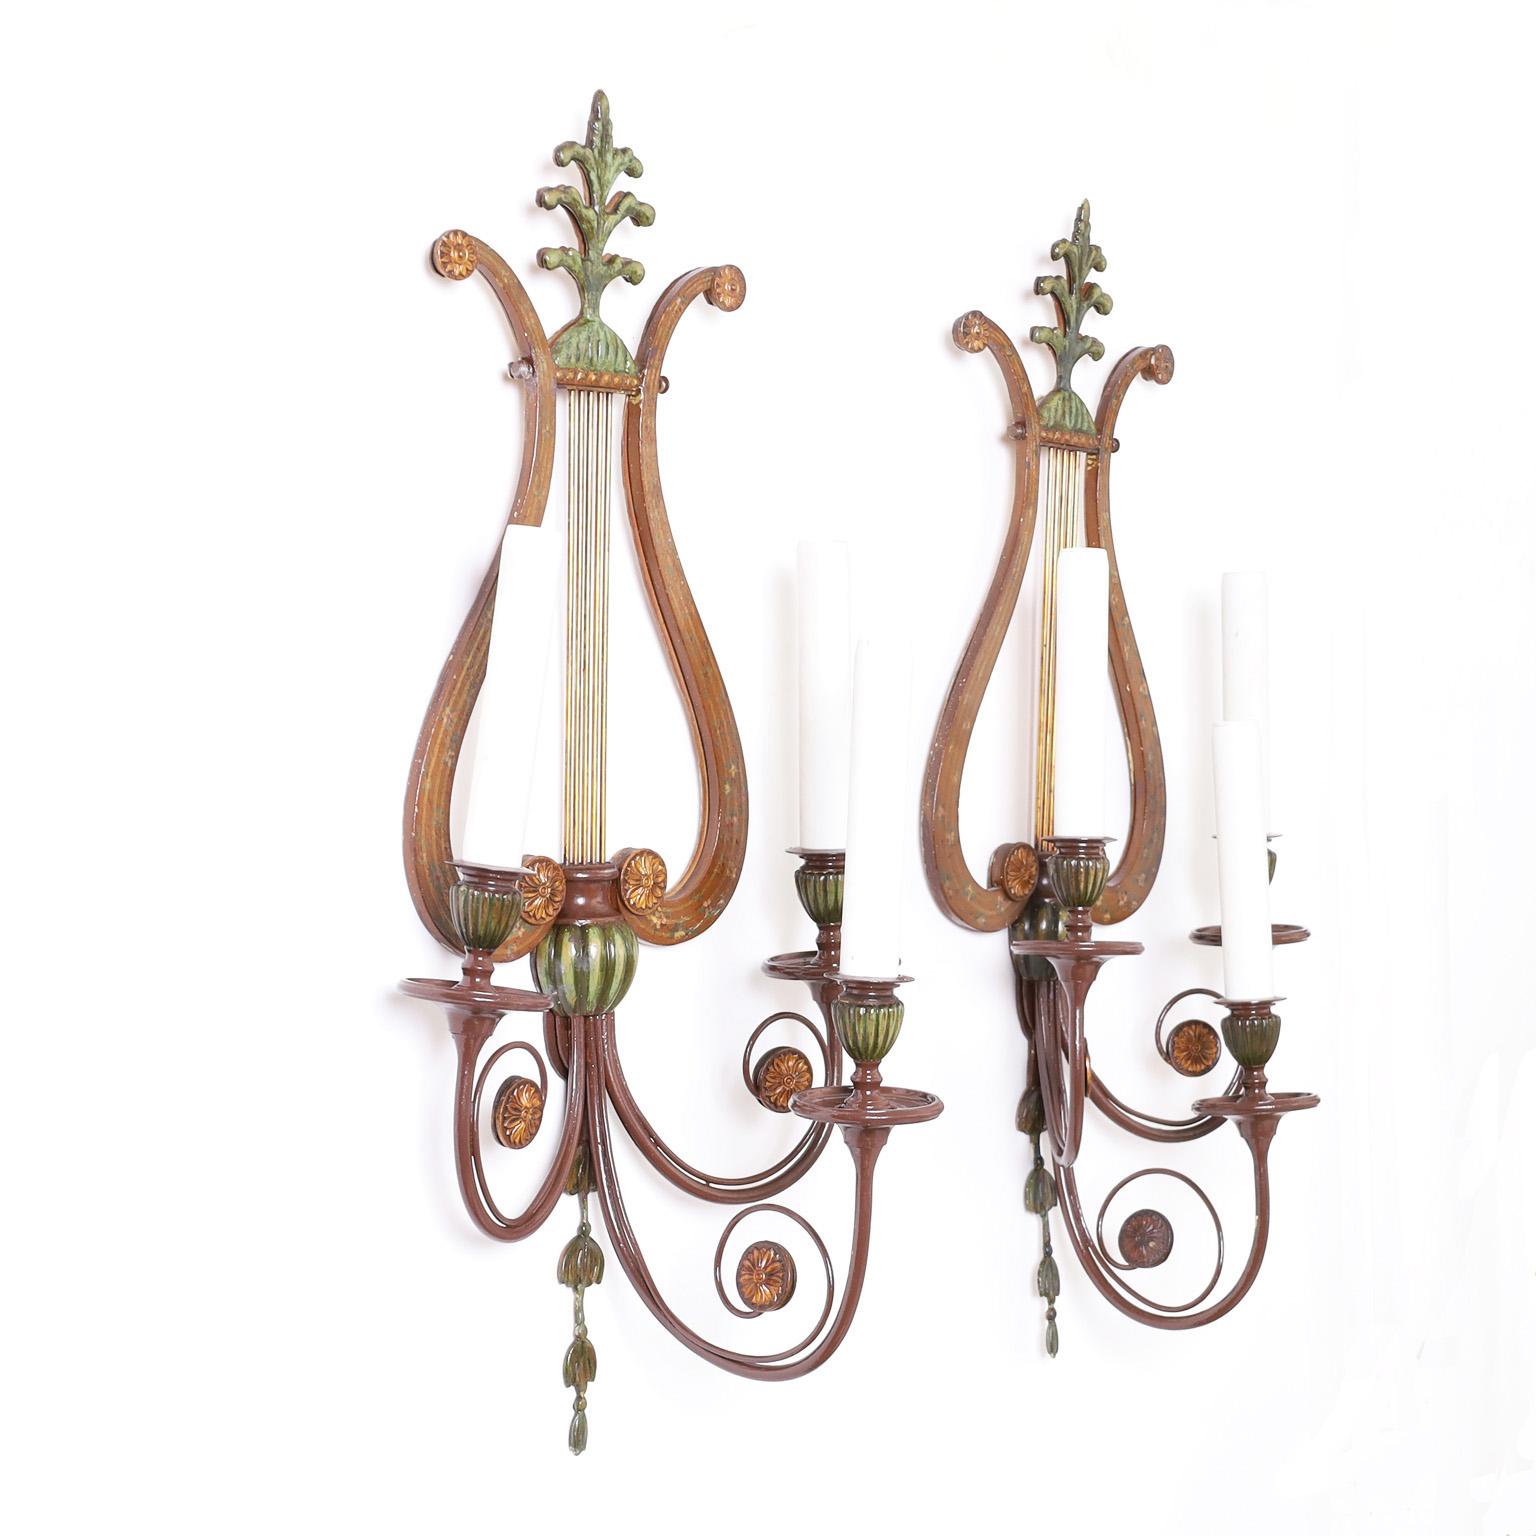 Antique pair of Adam style three light tole wall sconces crafted in metal with a lyre form. Made by the Sterling Bronze co. New York.